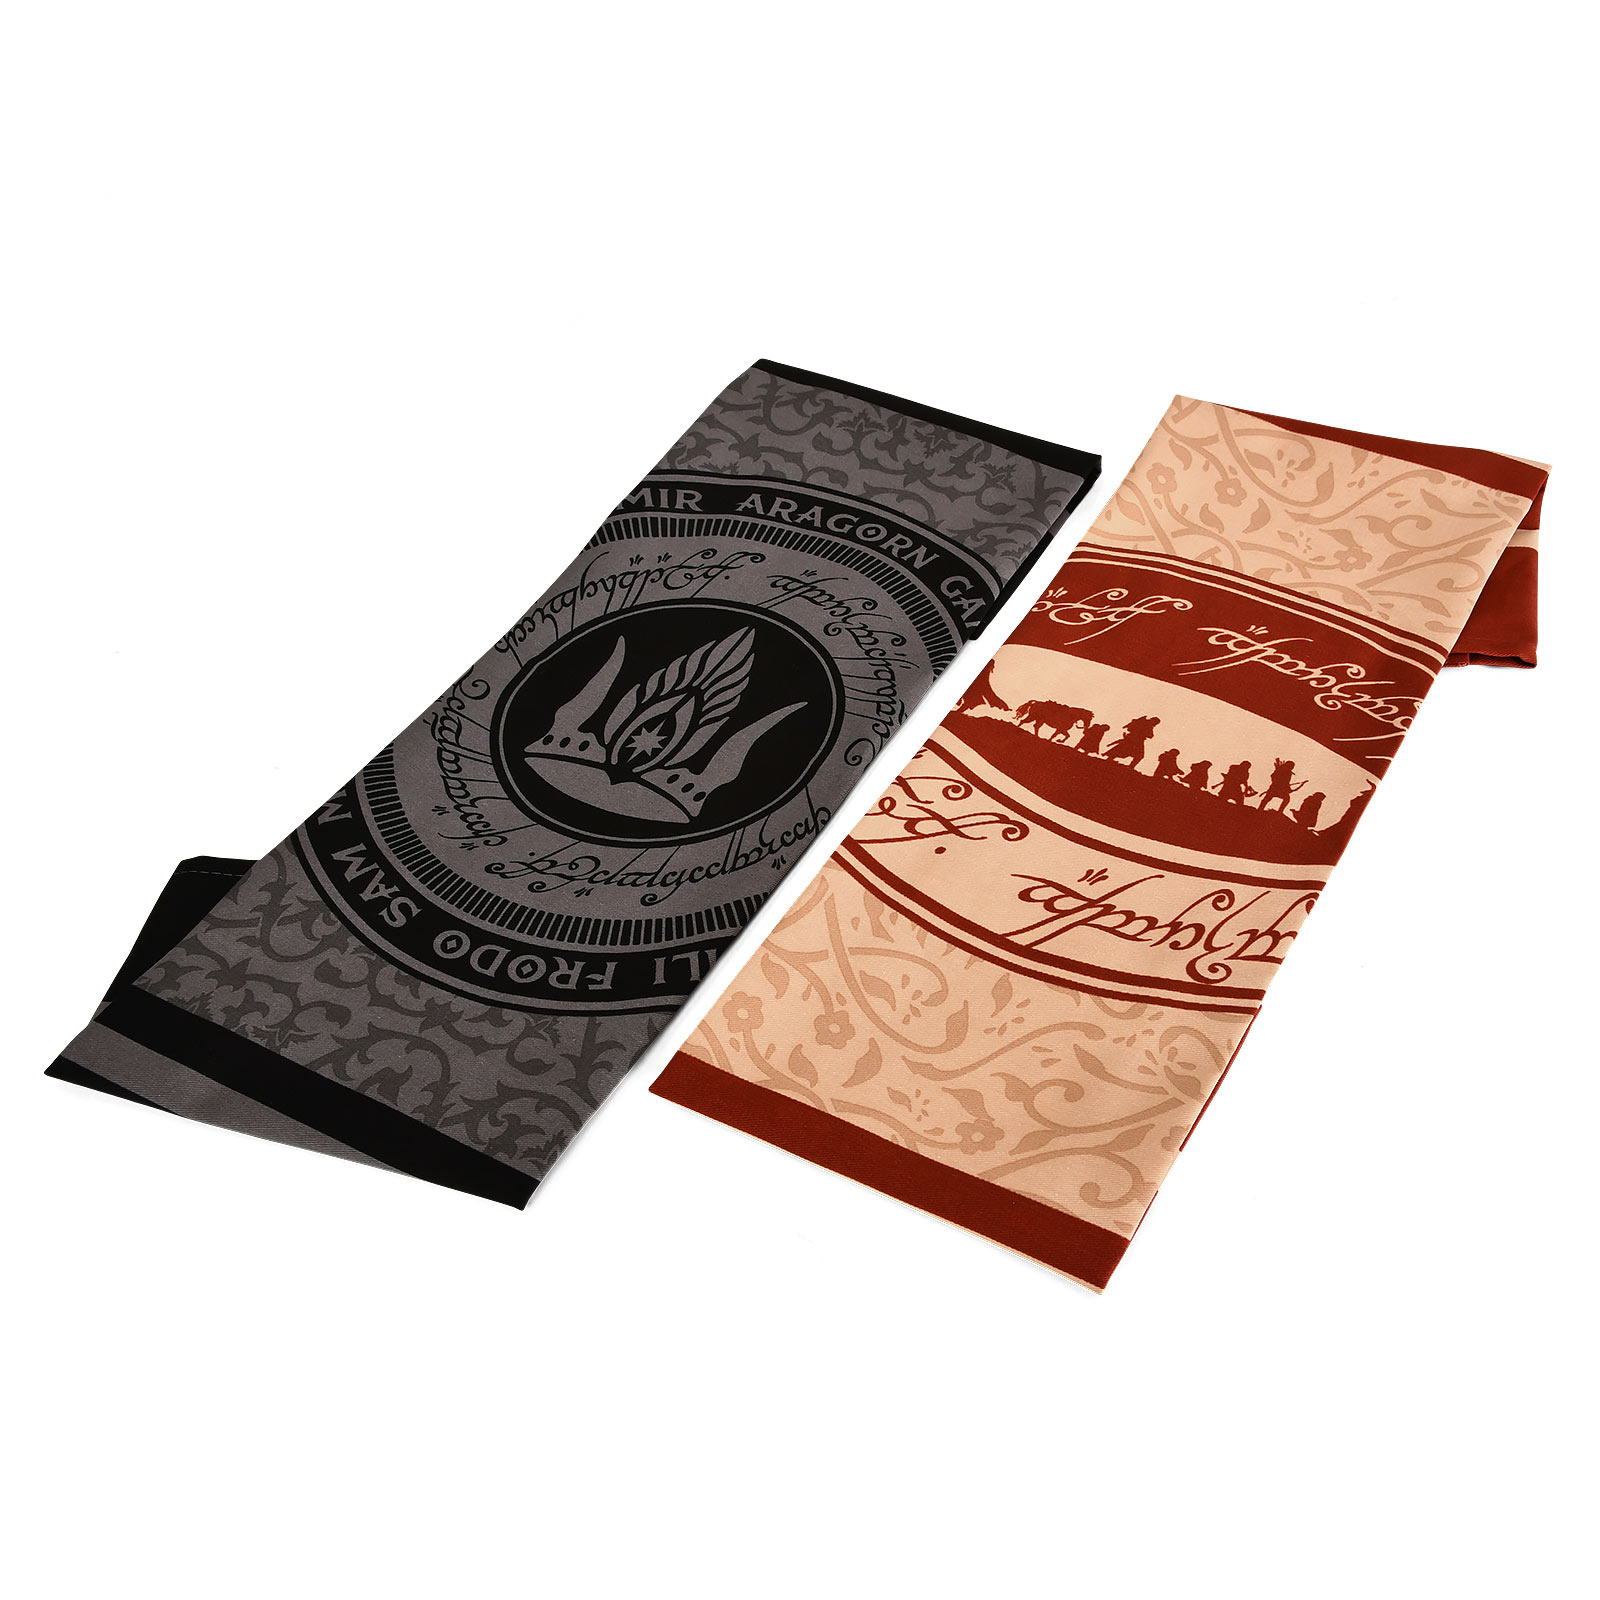 Lord of the Rings - The One Ring Dish Towels Set